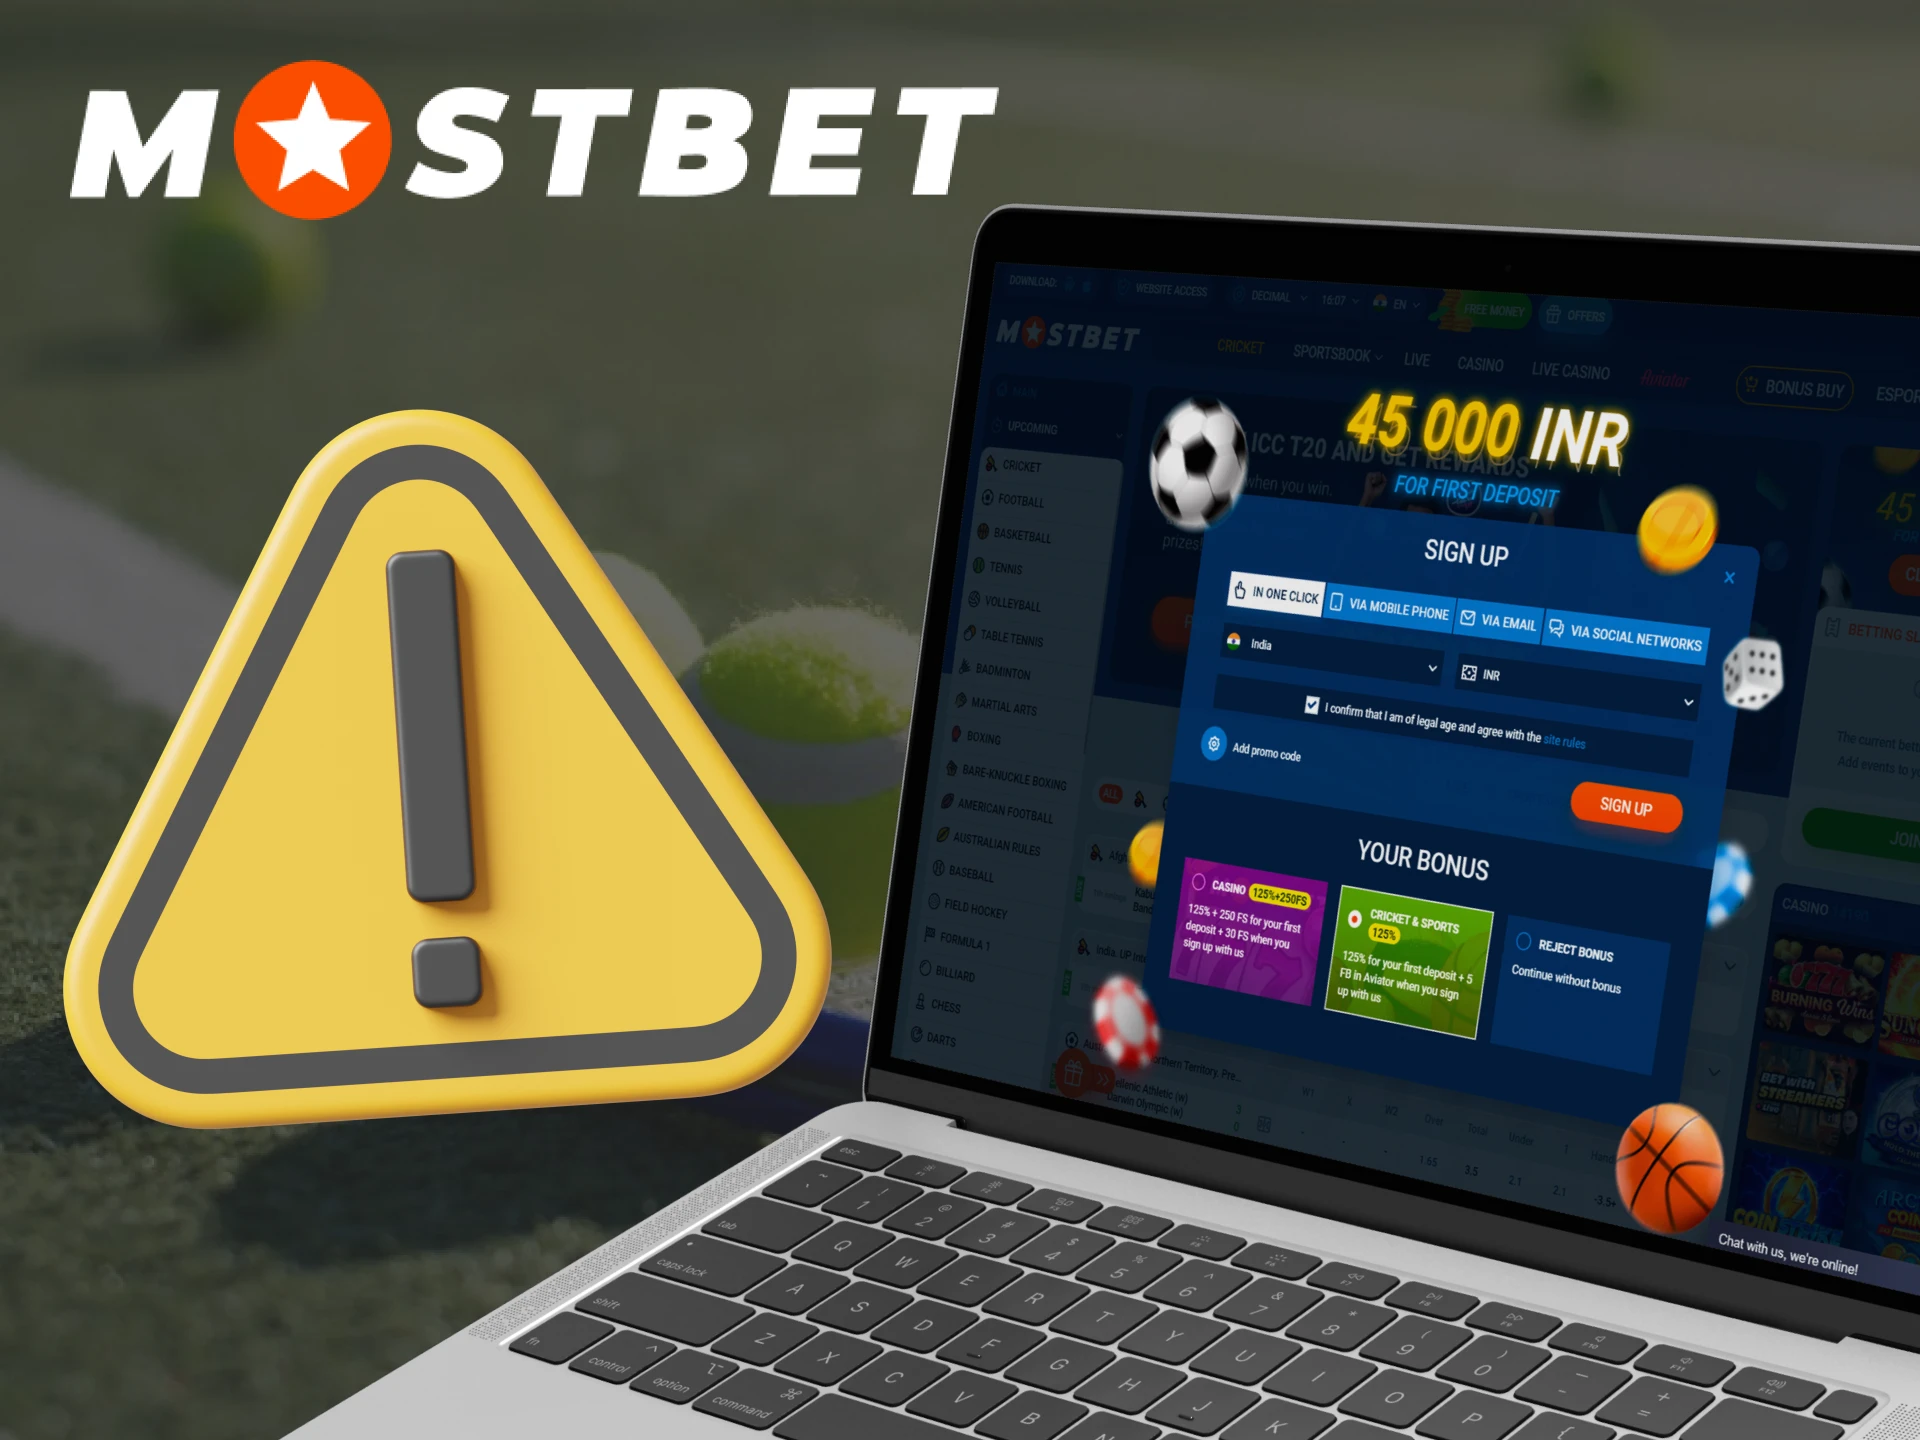 Before registering with Mostbet, find out what problems may arise during the process.